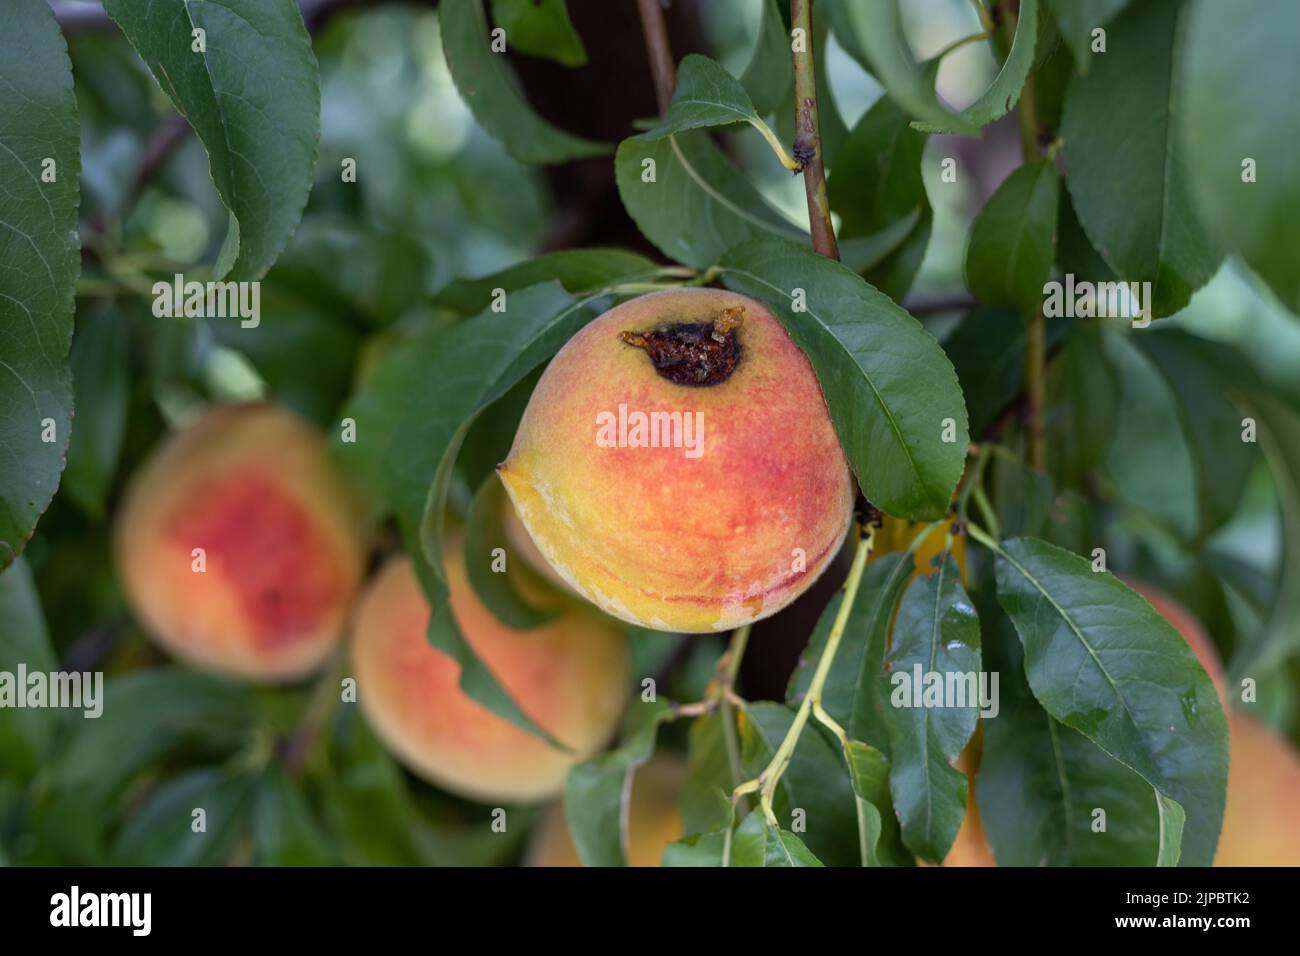 Peach fruit are damage in the tree by a fruit disease Stock Photo